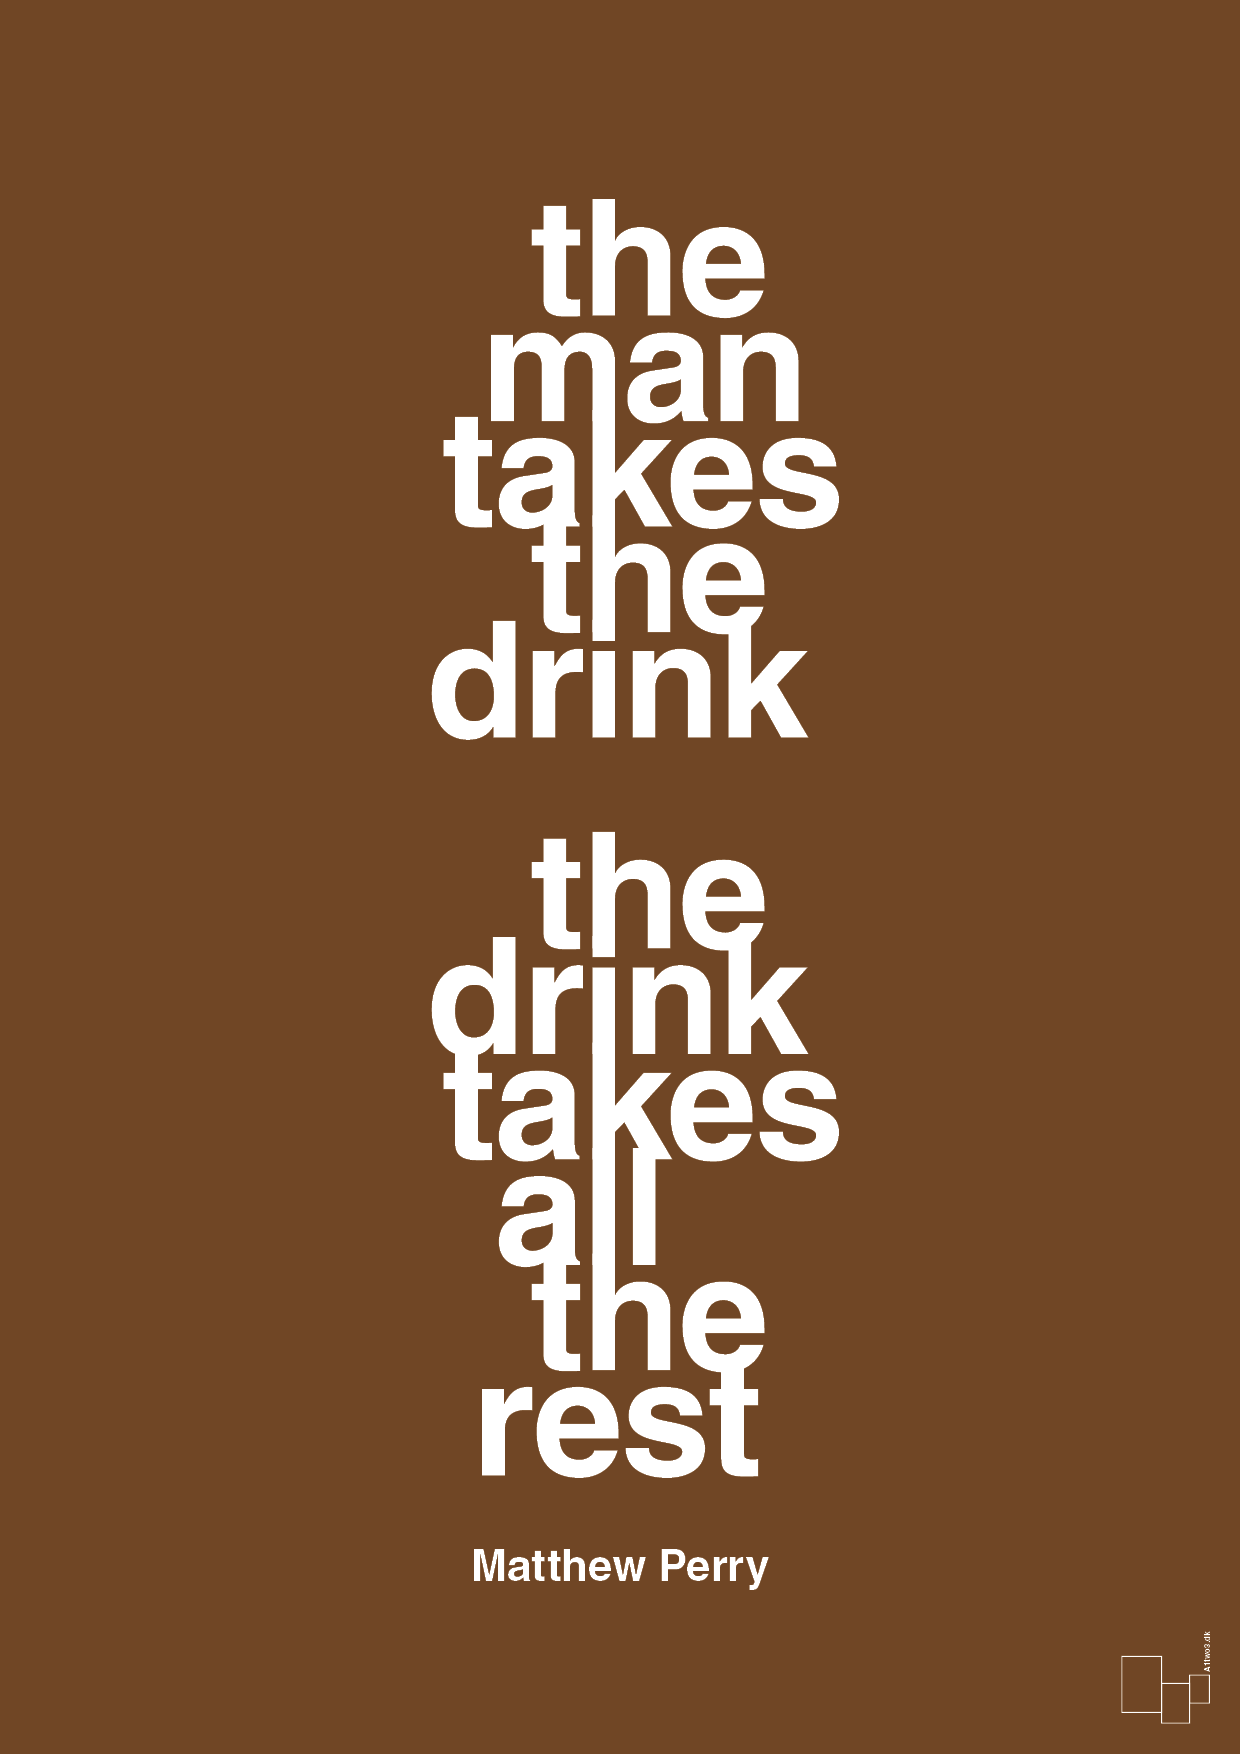 the man takes the drink the drink takes all the rest - Plakat med Citater i Dark Brown